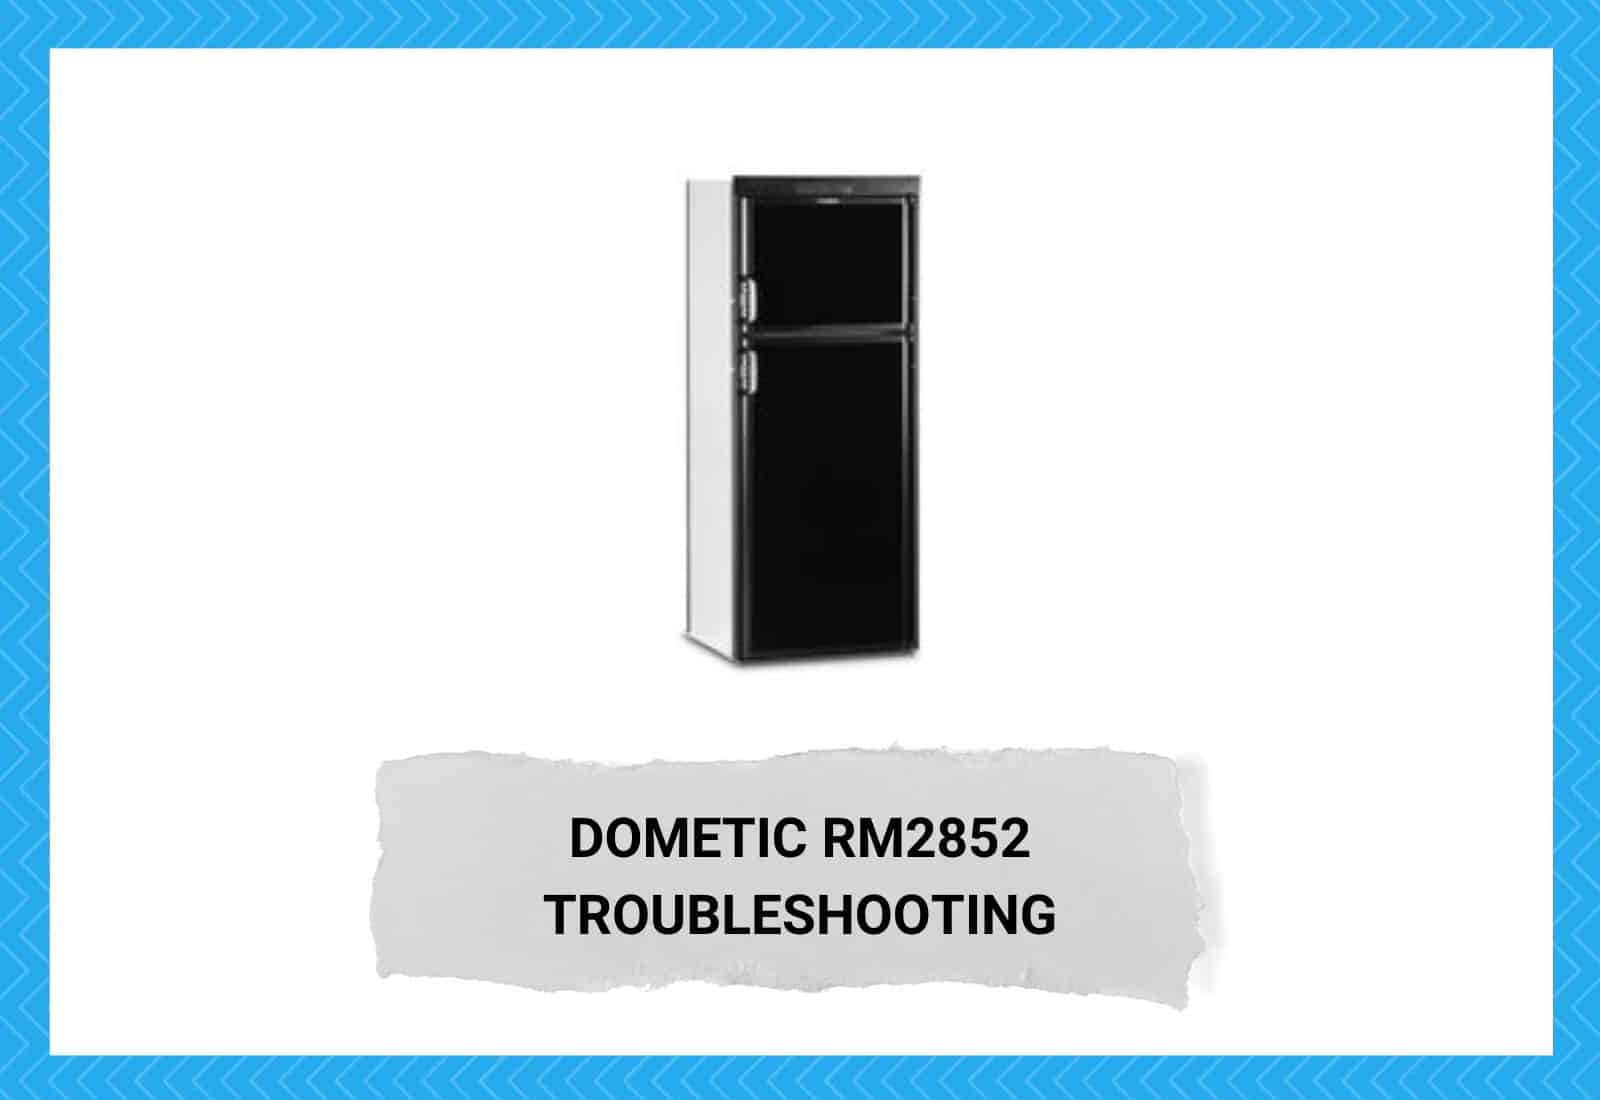 Dometic RM2852 Troubleshooting